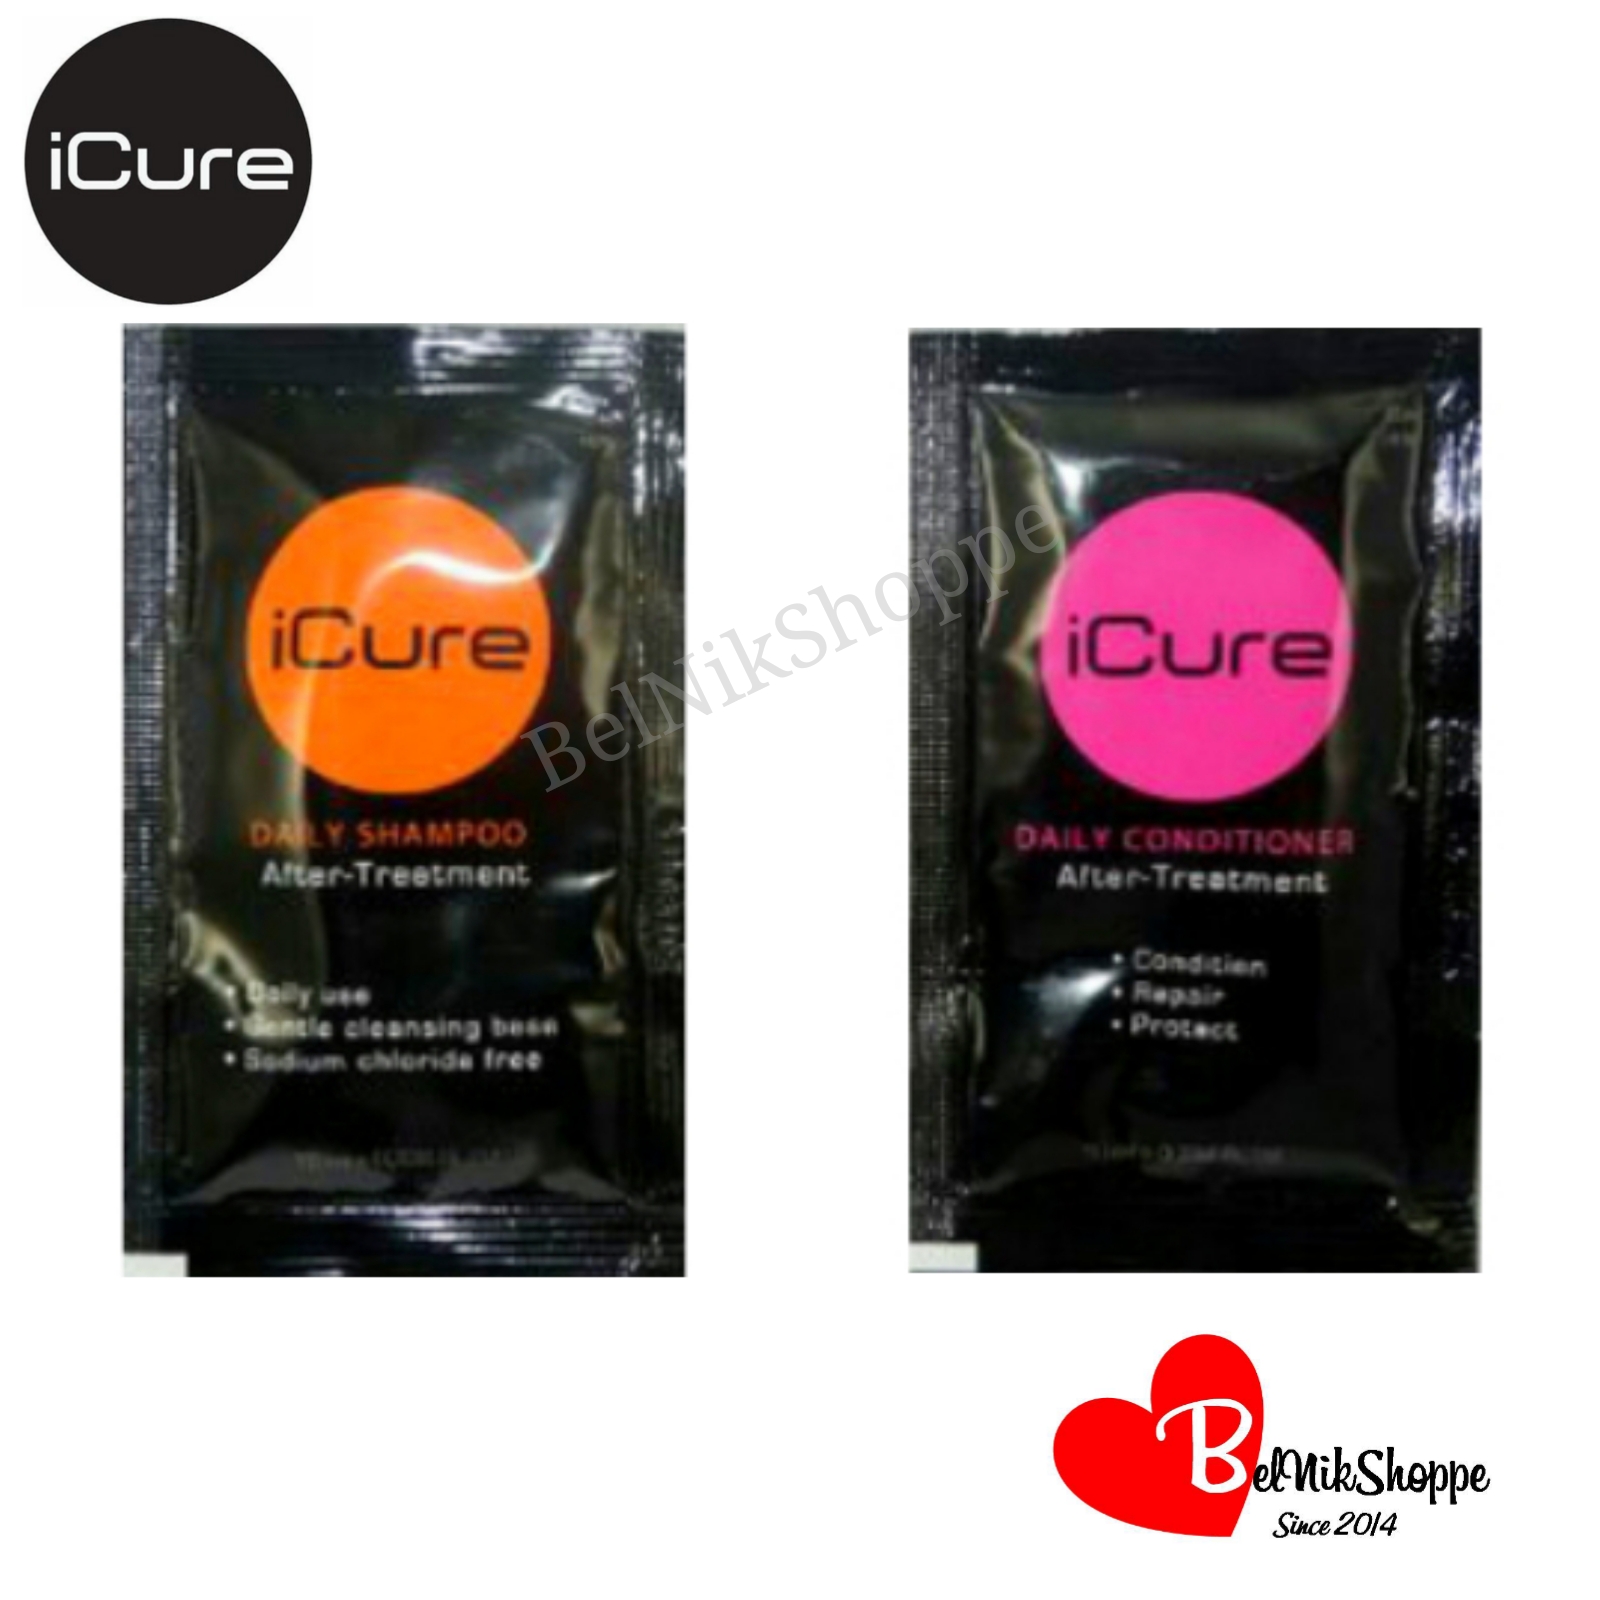 iCure After Treatment Shampoo and Conditioner Sachet Set (10 ml ...